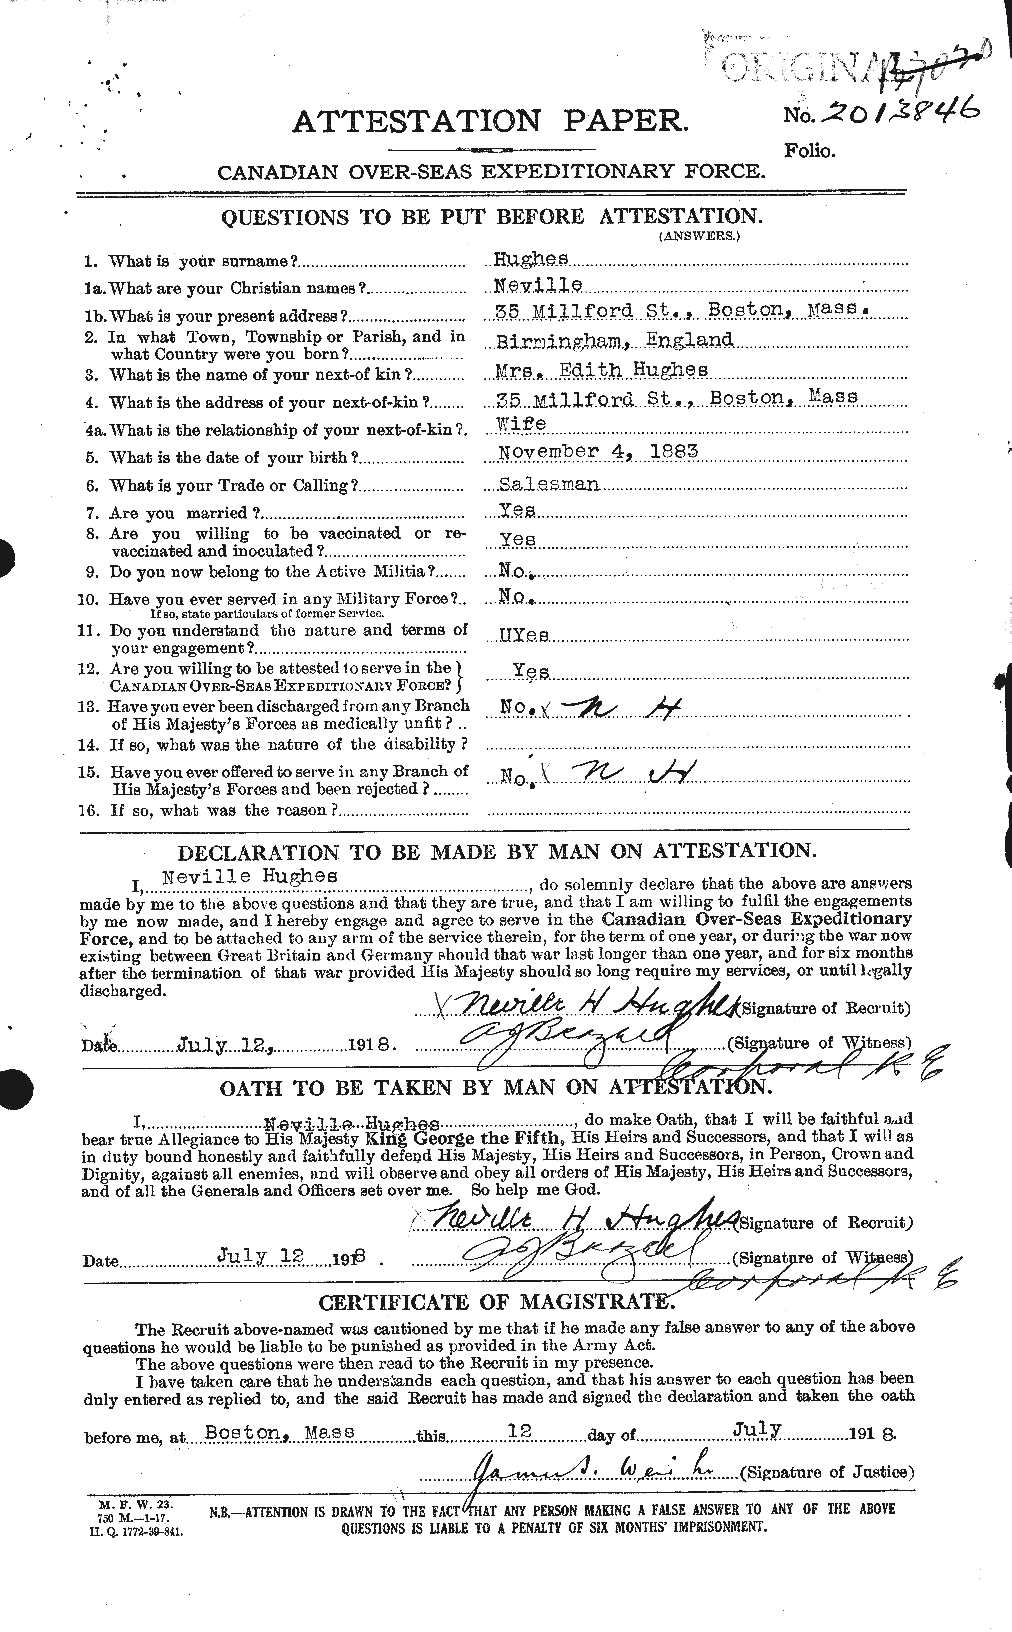 Personnel Records of the First World War - CEF 404127a